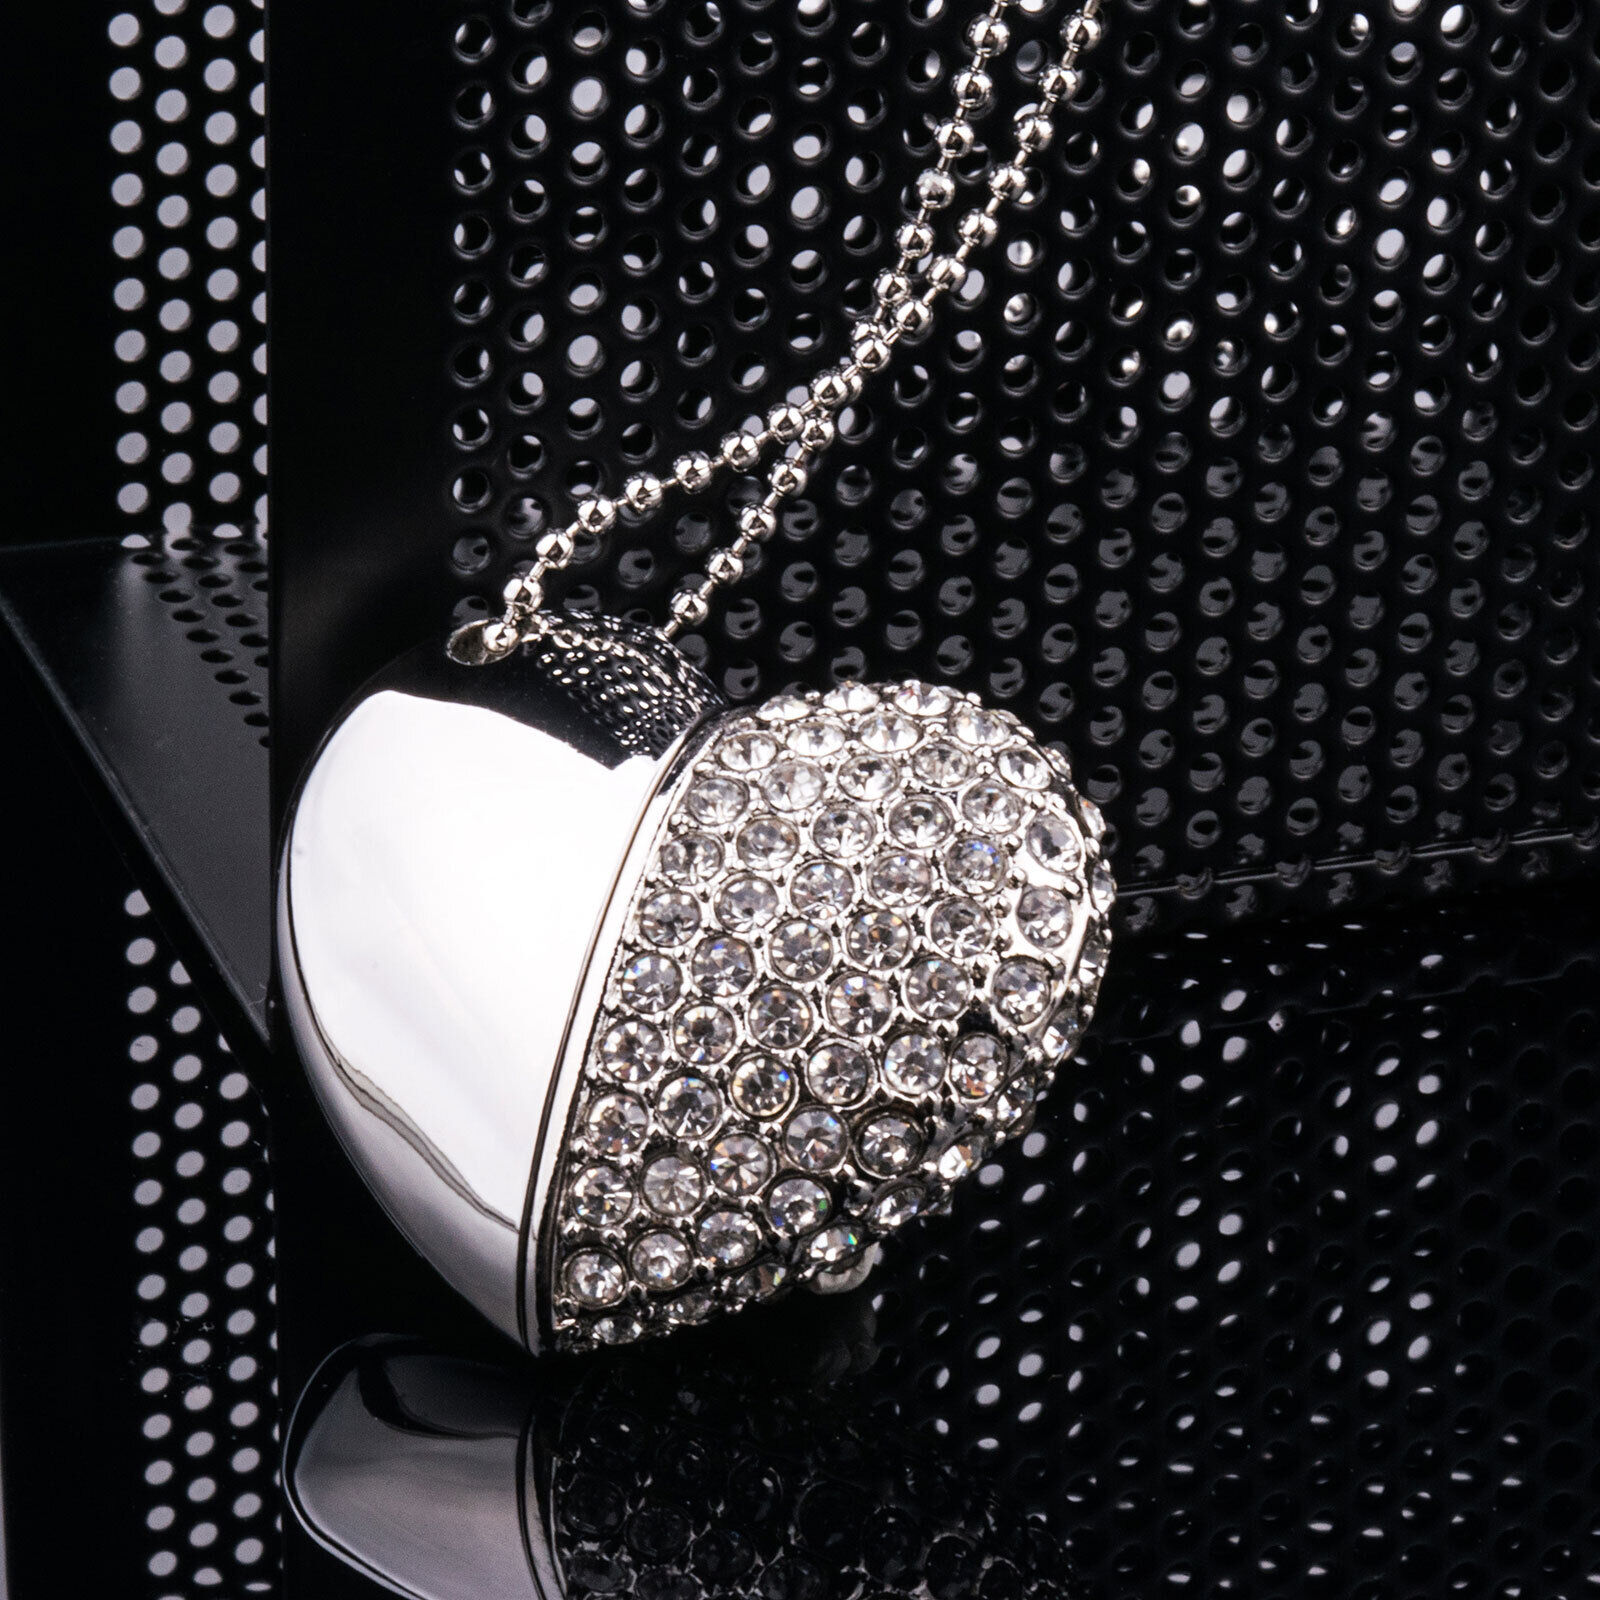 Diamond Crystal Heart Necklace Style 100pcs 64G USB Flash Drive For Wedding Gift